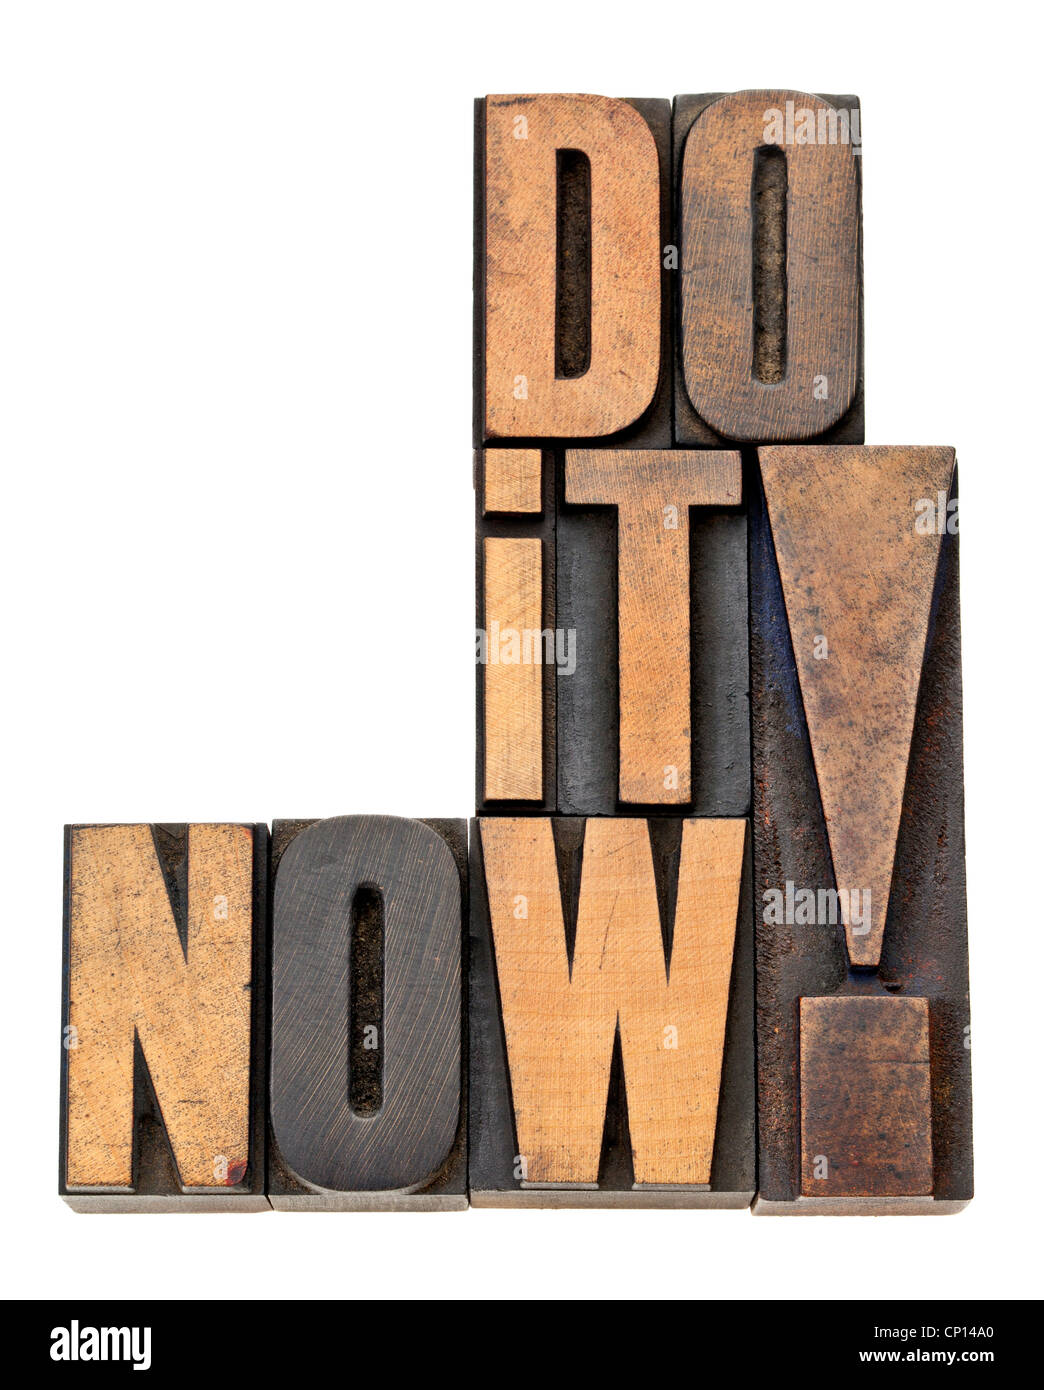 do it now - motivation and encouragement - isolated phrase in vintage letterpress wood type Stock Photo